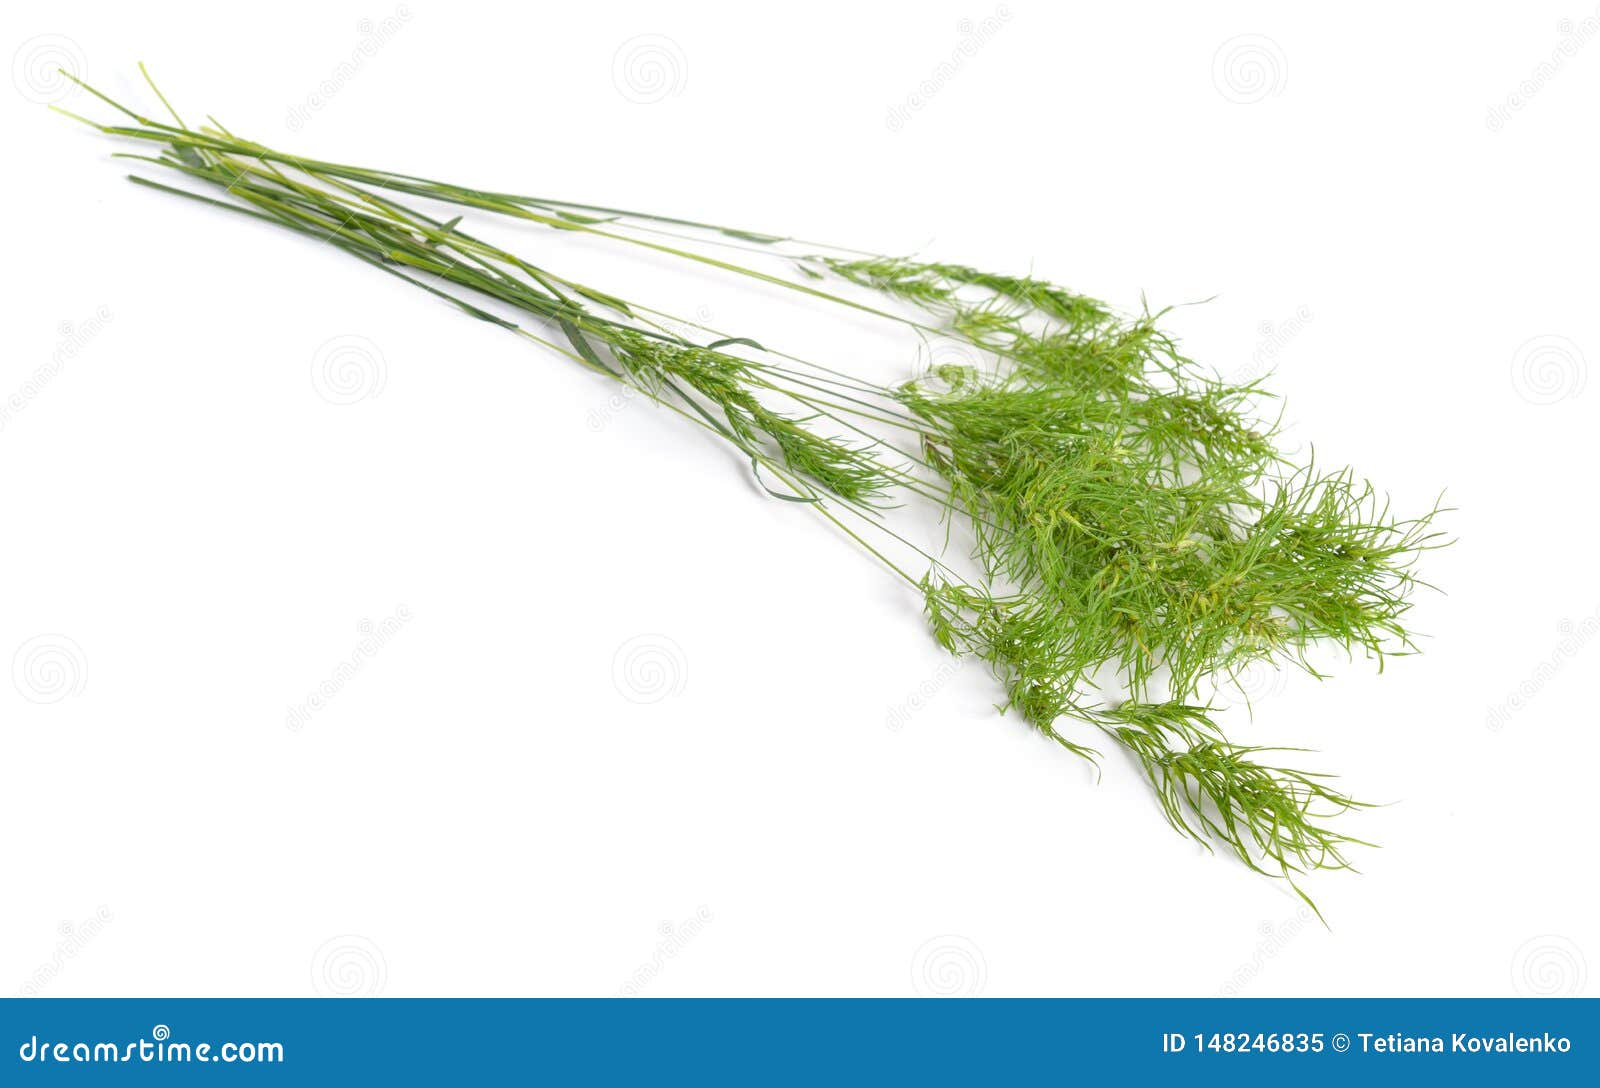 poa alpina, commonly known as alpine meadow-grass or alpine bluegrass. 